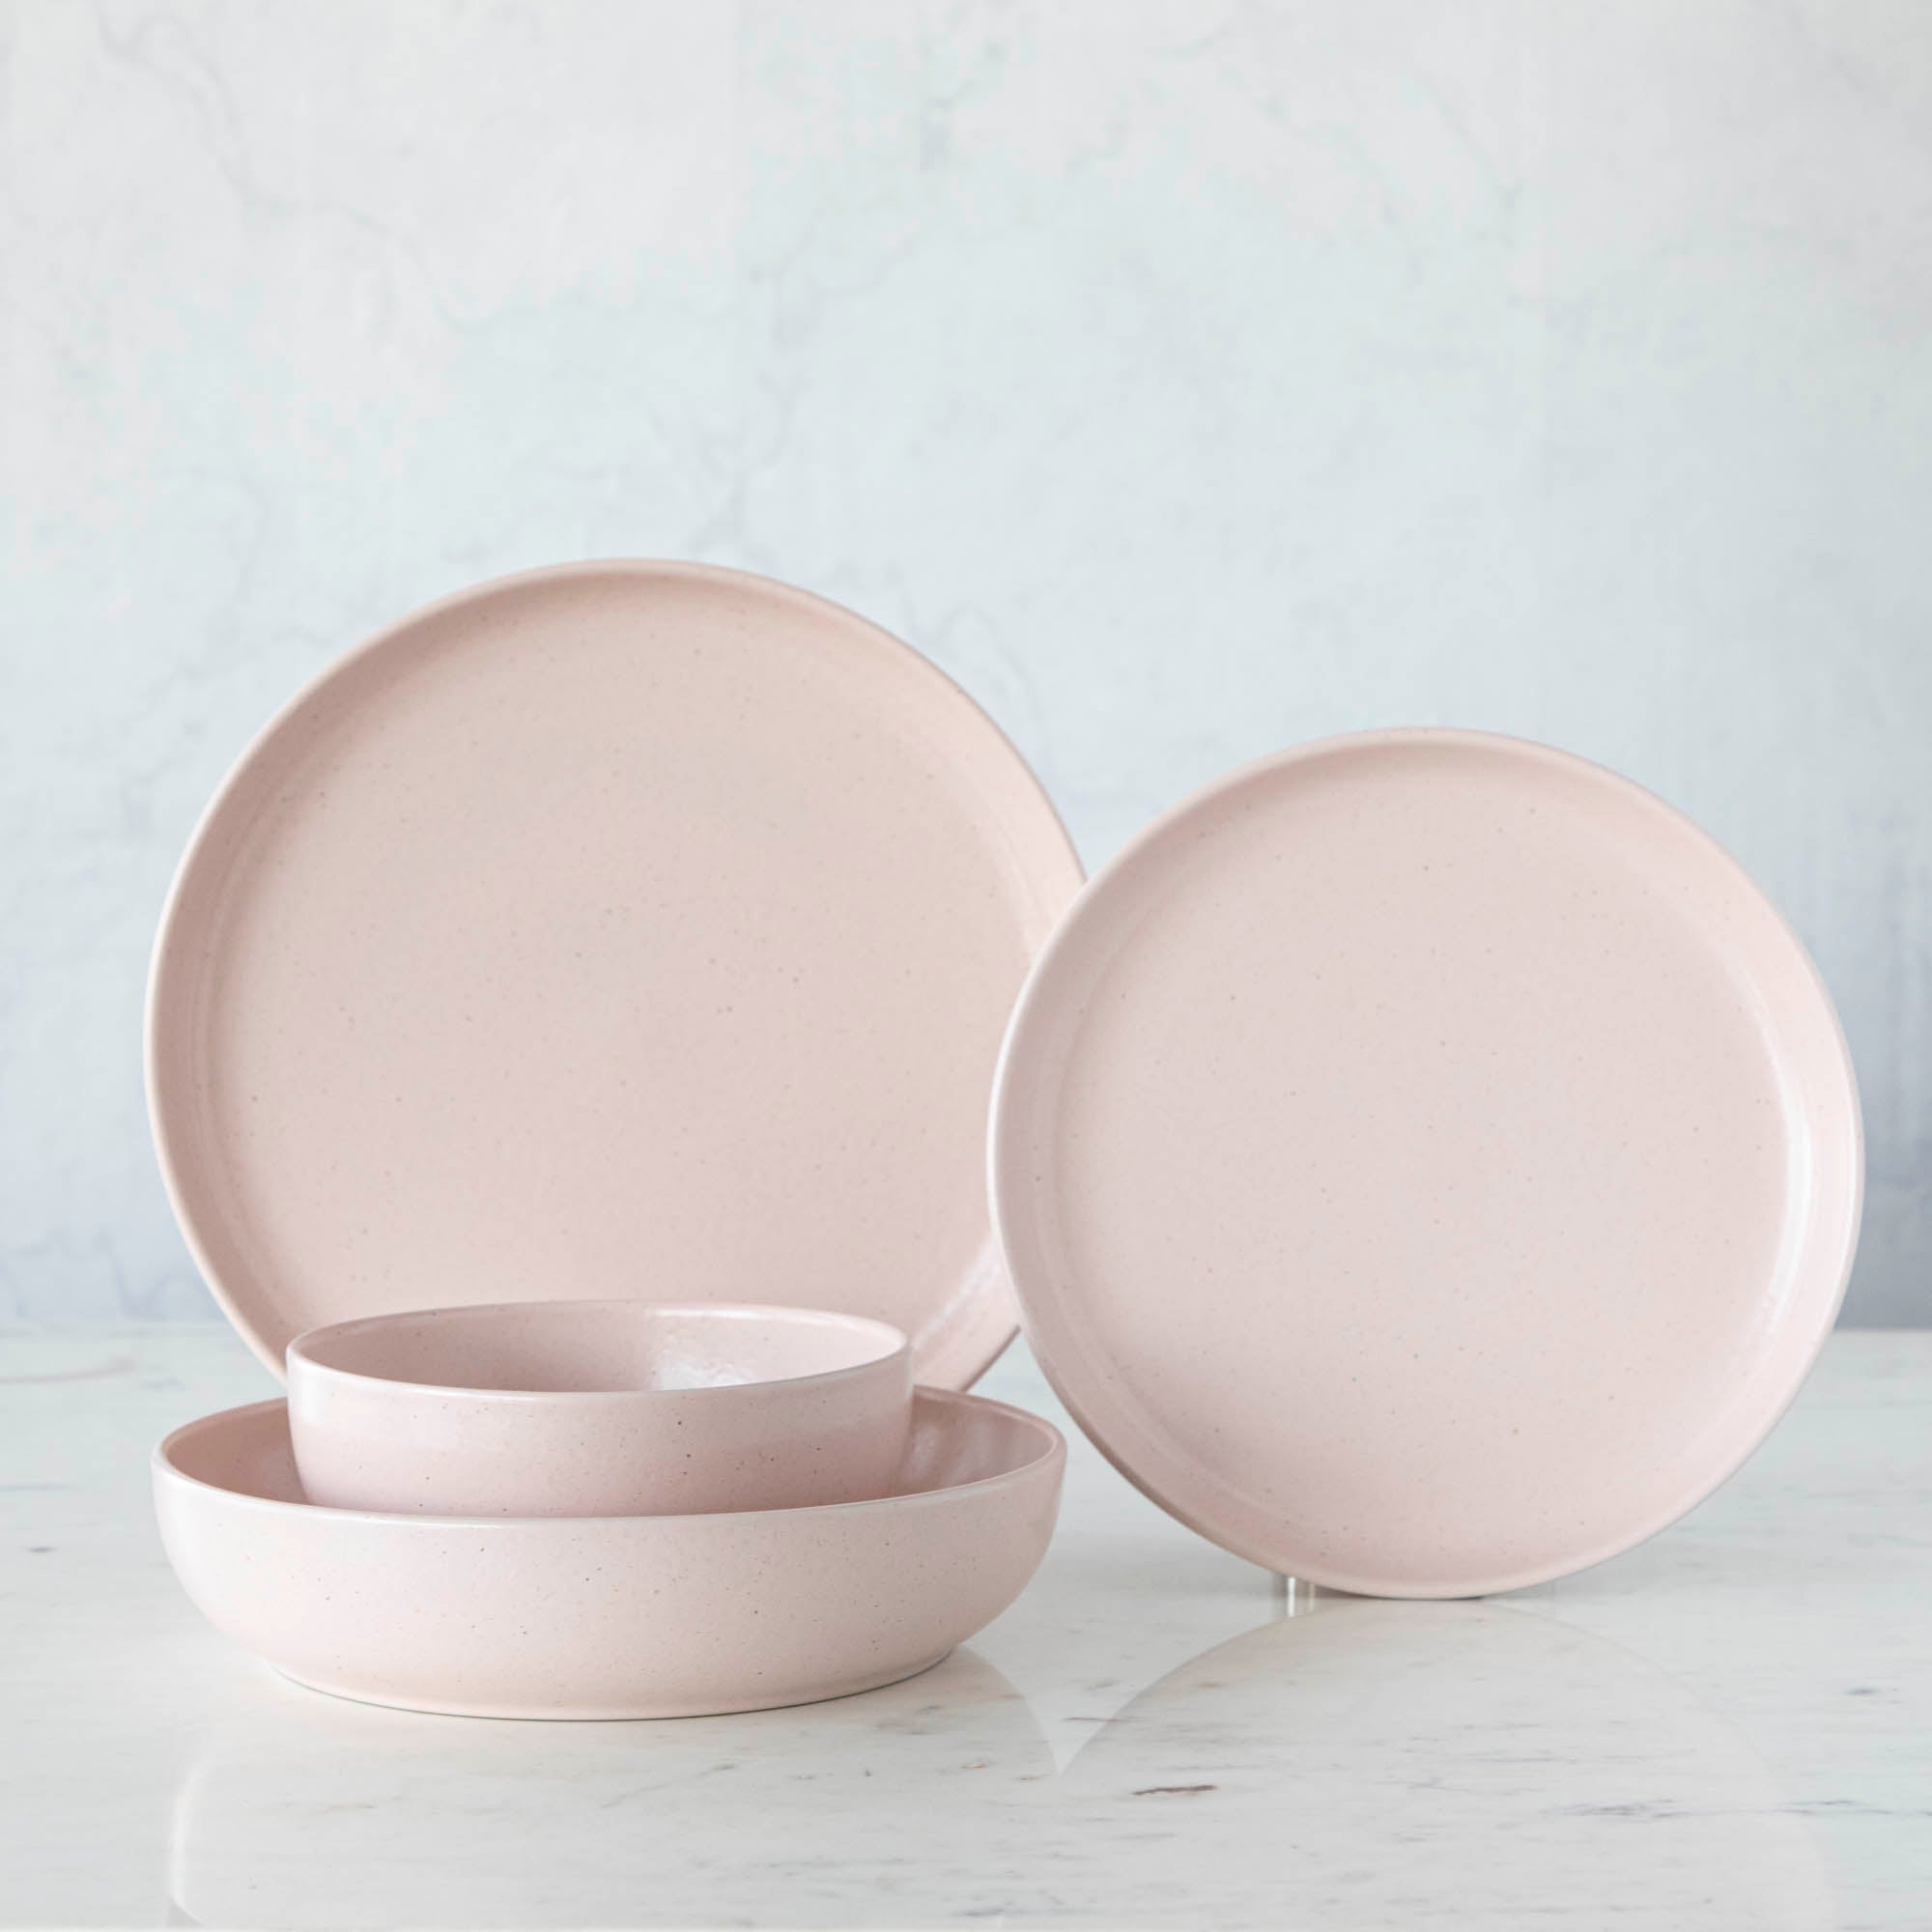 A set of Pacifica Marshmallow Dinnerware plates and bowls from the Casafina Living collection with a matte finish, placed on a table.